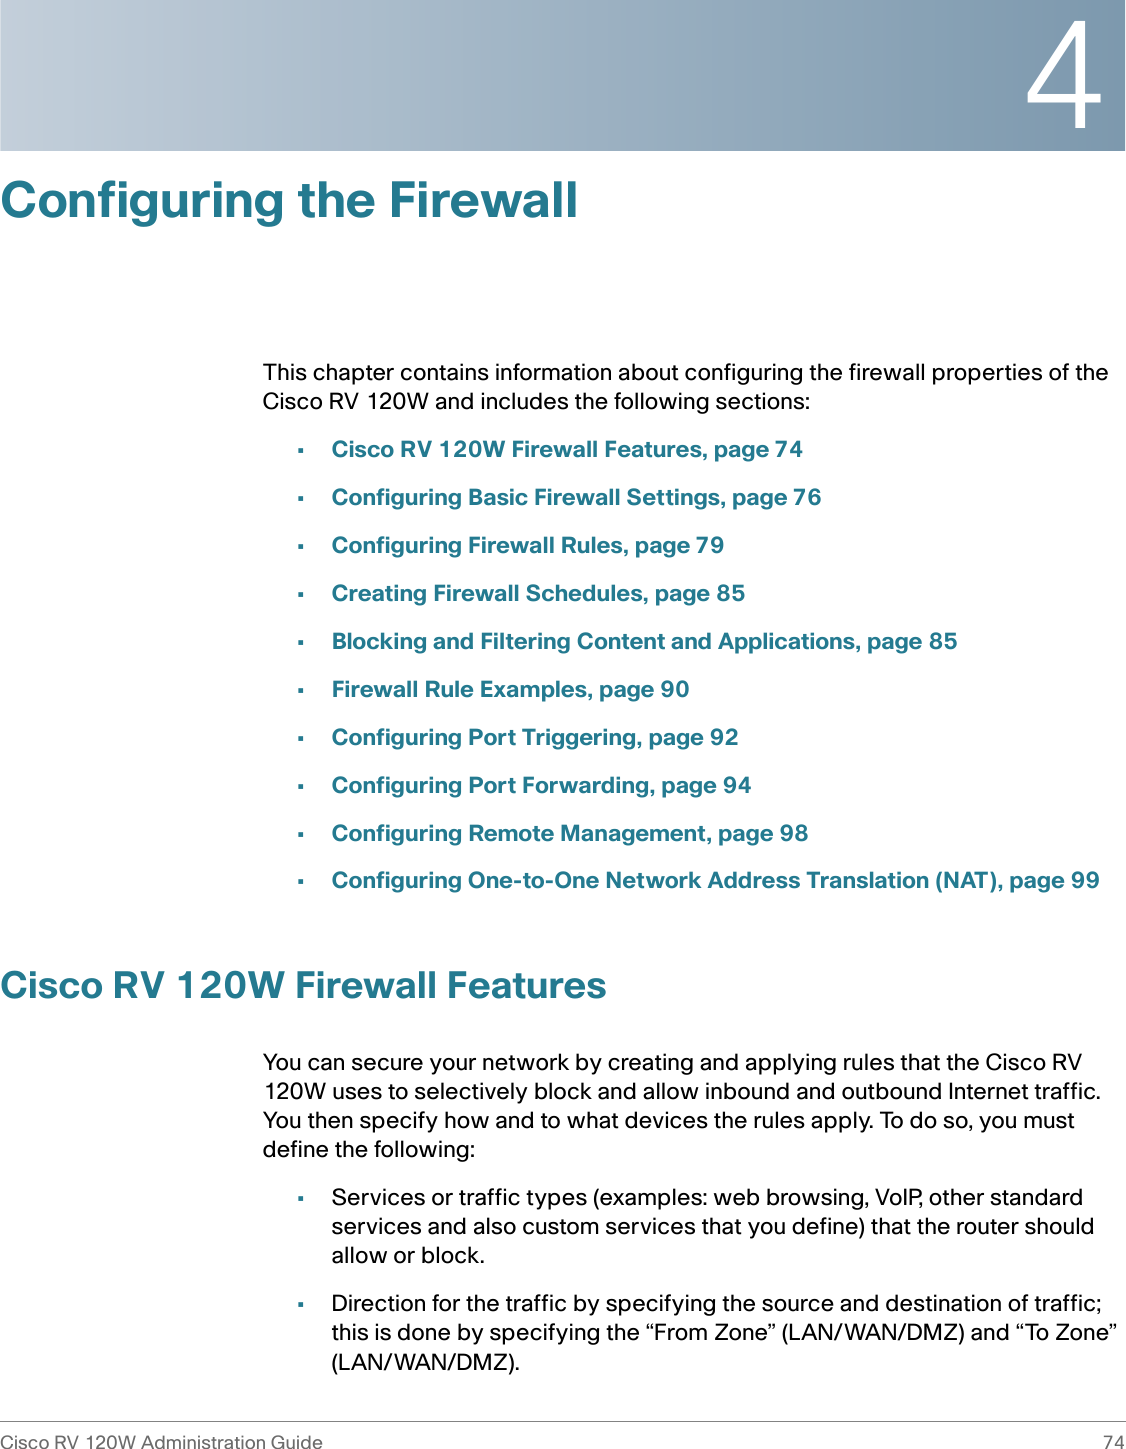 4Cisco RV 120W Administration Guide 74 Configuring the FirewallThis chapter contains information about configuring the firewall properties of the Cisco RV 120W and includes the following sections:•Cisco RV 120W Firewall Features, page 74•Configuring Basic Firewall Settings, page 76•Configuring Firewall Rules, page 79•Creating Firewall Schedules, page 85•Blocking and Filtering Content and Applications, page 85•Firewall Rule Examples, page 90•Configuring Port Triggering, page 92•Configuring Port Forwarding, page 94•Configuring Remote Management, page 98•Configuring One-to-One Network Address Translation (NAT), page 99Cisco RV 120W Firewall FeaturesYou can secure your network by creating and applying rules that the Cisco RV 120W uses to selectively block and allow inbound and outbound Internet traffic. You then specify how and to what devices the rules apply. To do so, you must define the following:•Services or traffic types (examples: web browsing, VoIP, other standard services and also custom services that you define) that the router should allow or block.•Direction for the traffic by specifying the source and destination of traffic; this is done by specifying the “From Zone” (LAN/WAN/DMZ) and “To Zone” (LAN/WAN/DMZ).